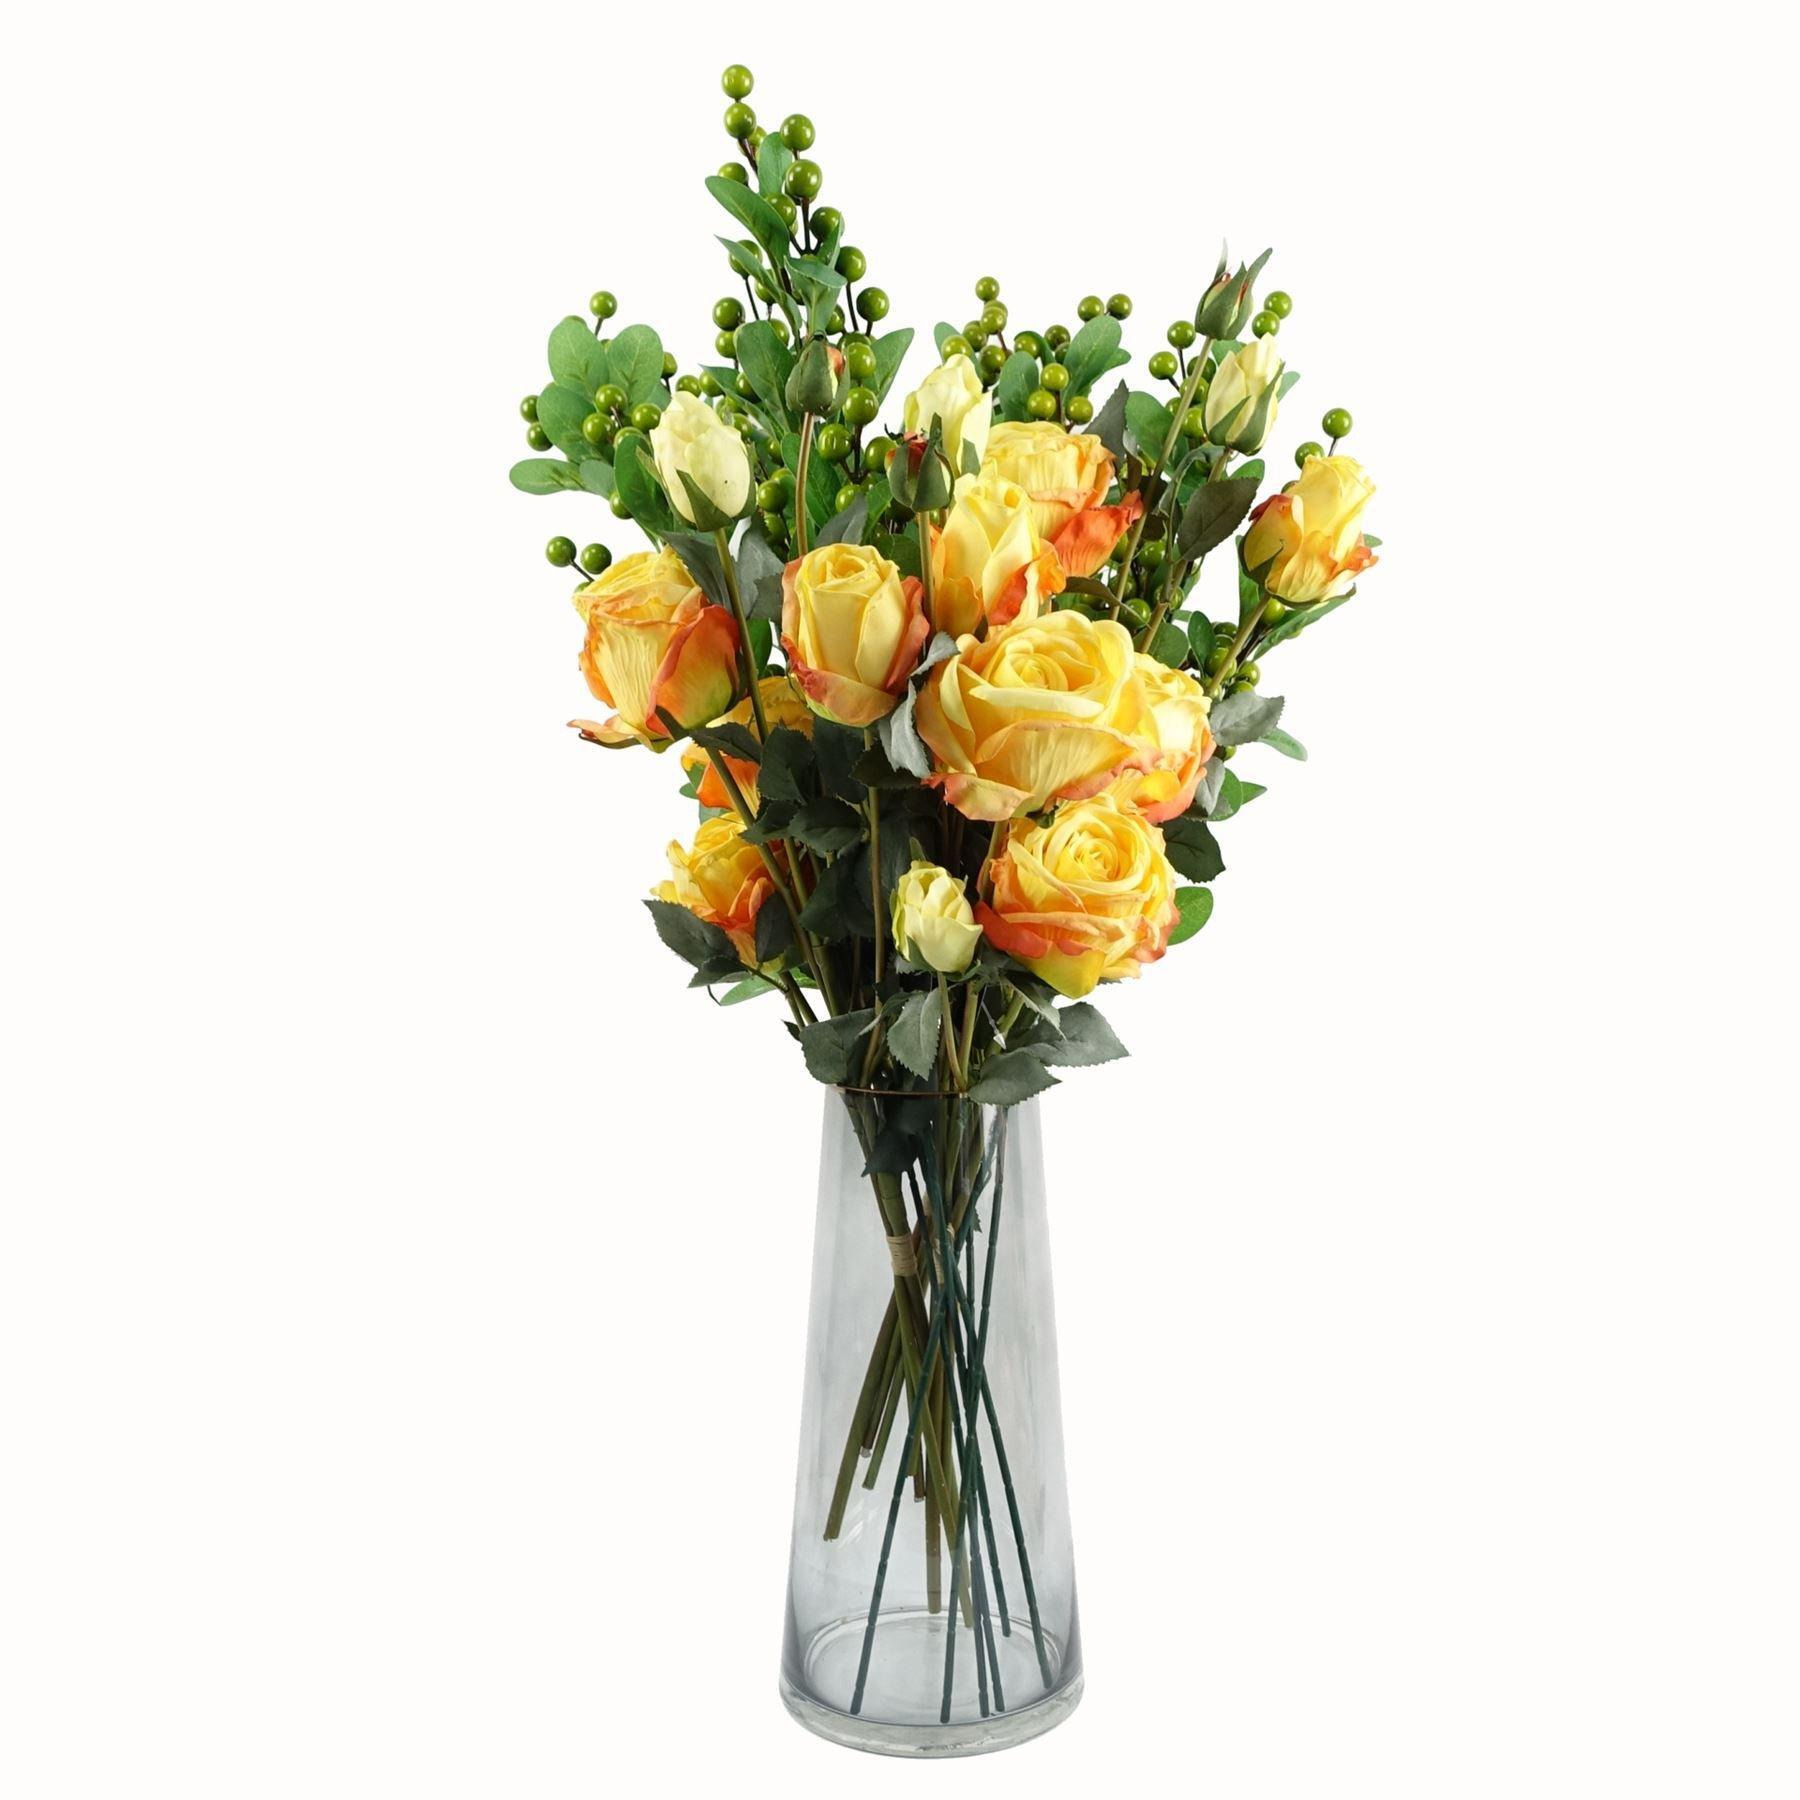 Leaf 60cm Yellow Rose Artificial Flowers Glass Vase - image 1